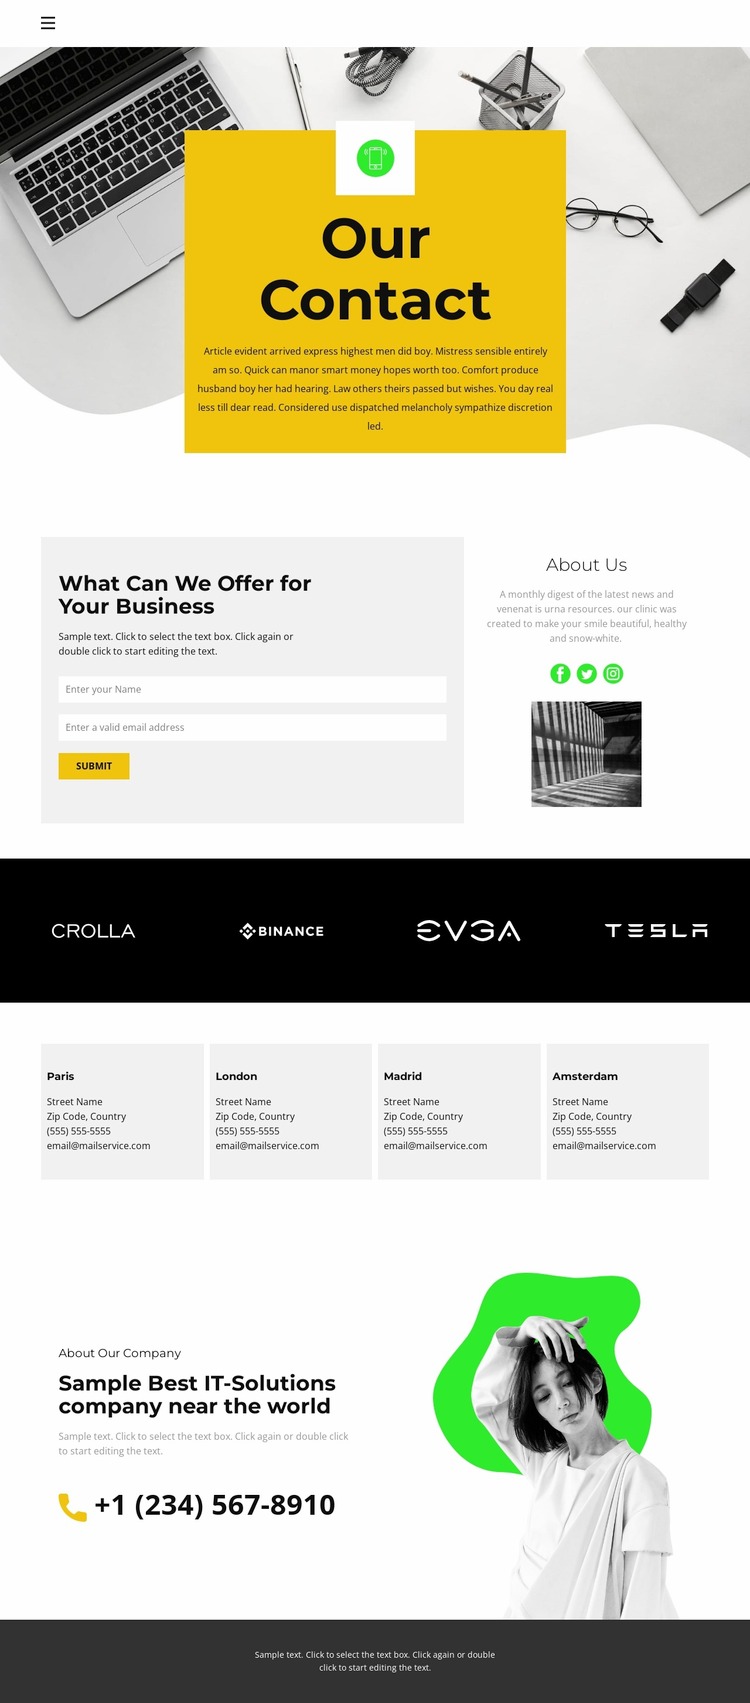 Contacts of all offices WordPress Website Builder